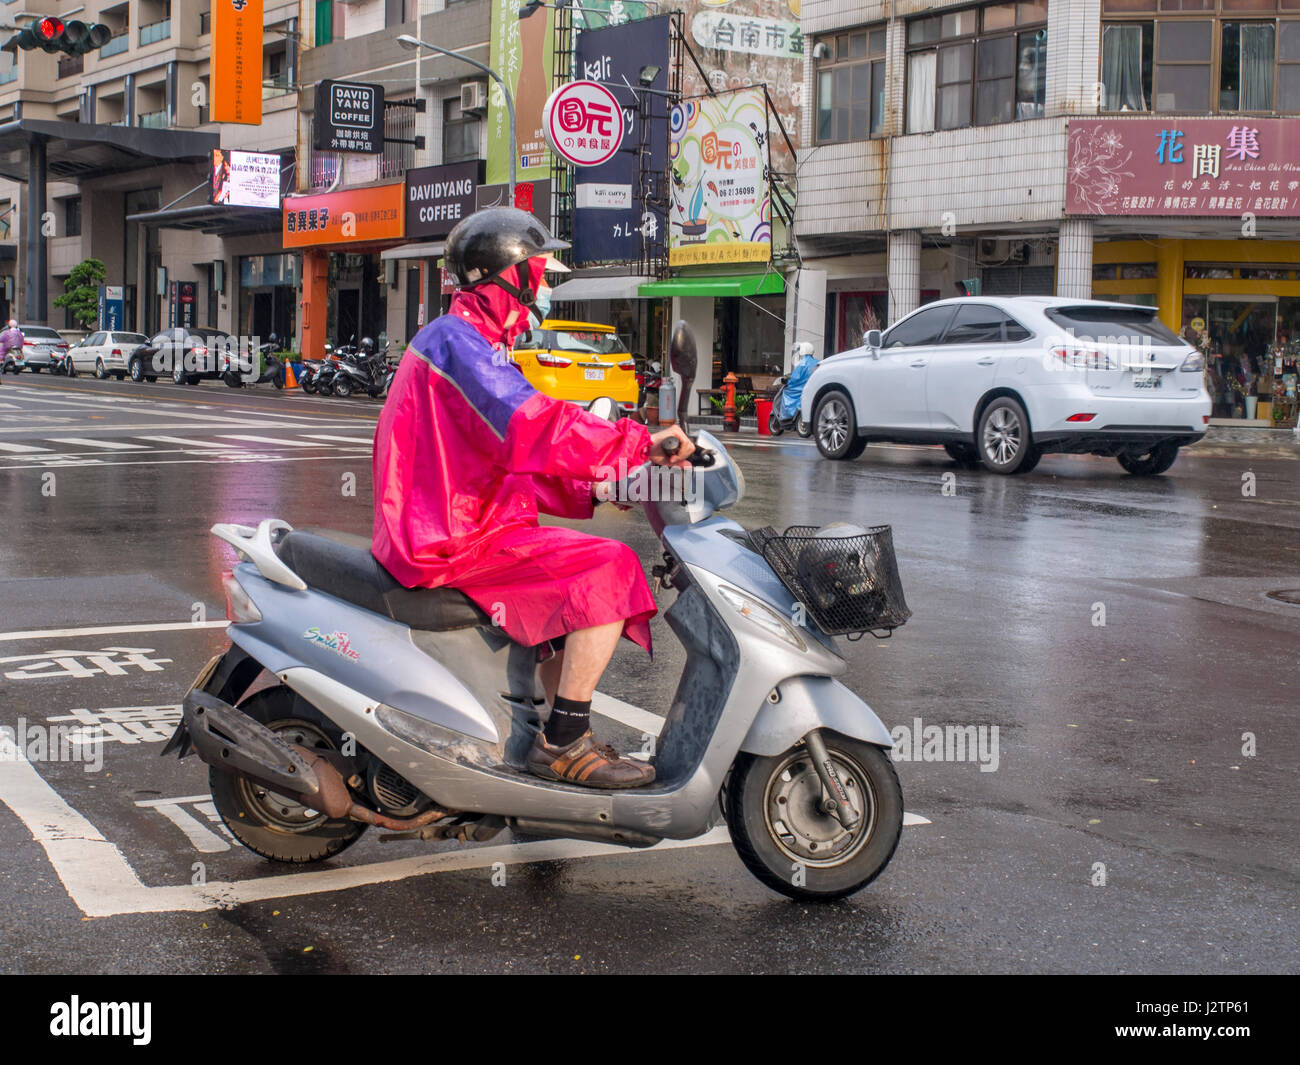 Tainan, Taiwan - October 11, 2016: The people of Taiwan on scooters Stock Photo